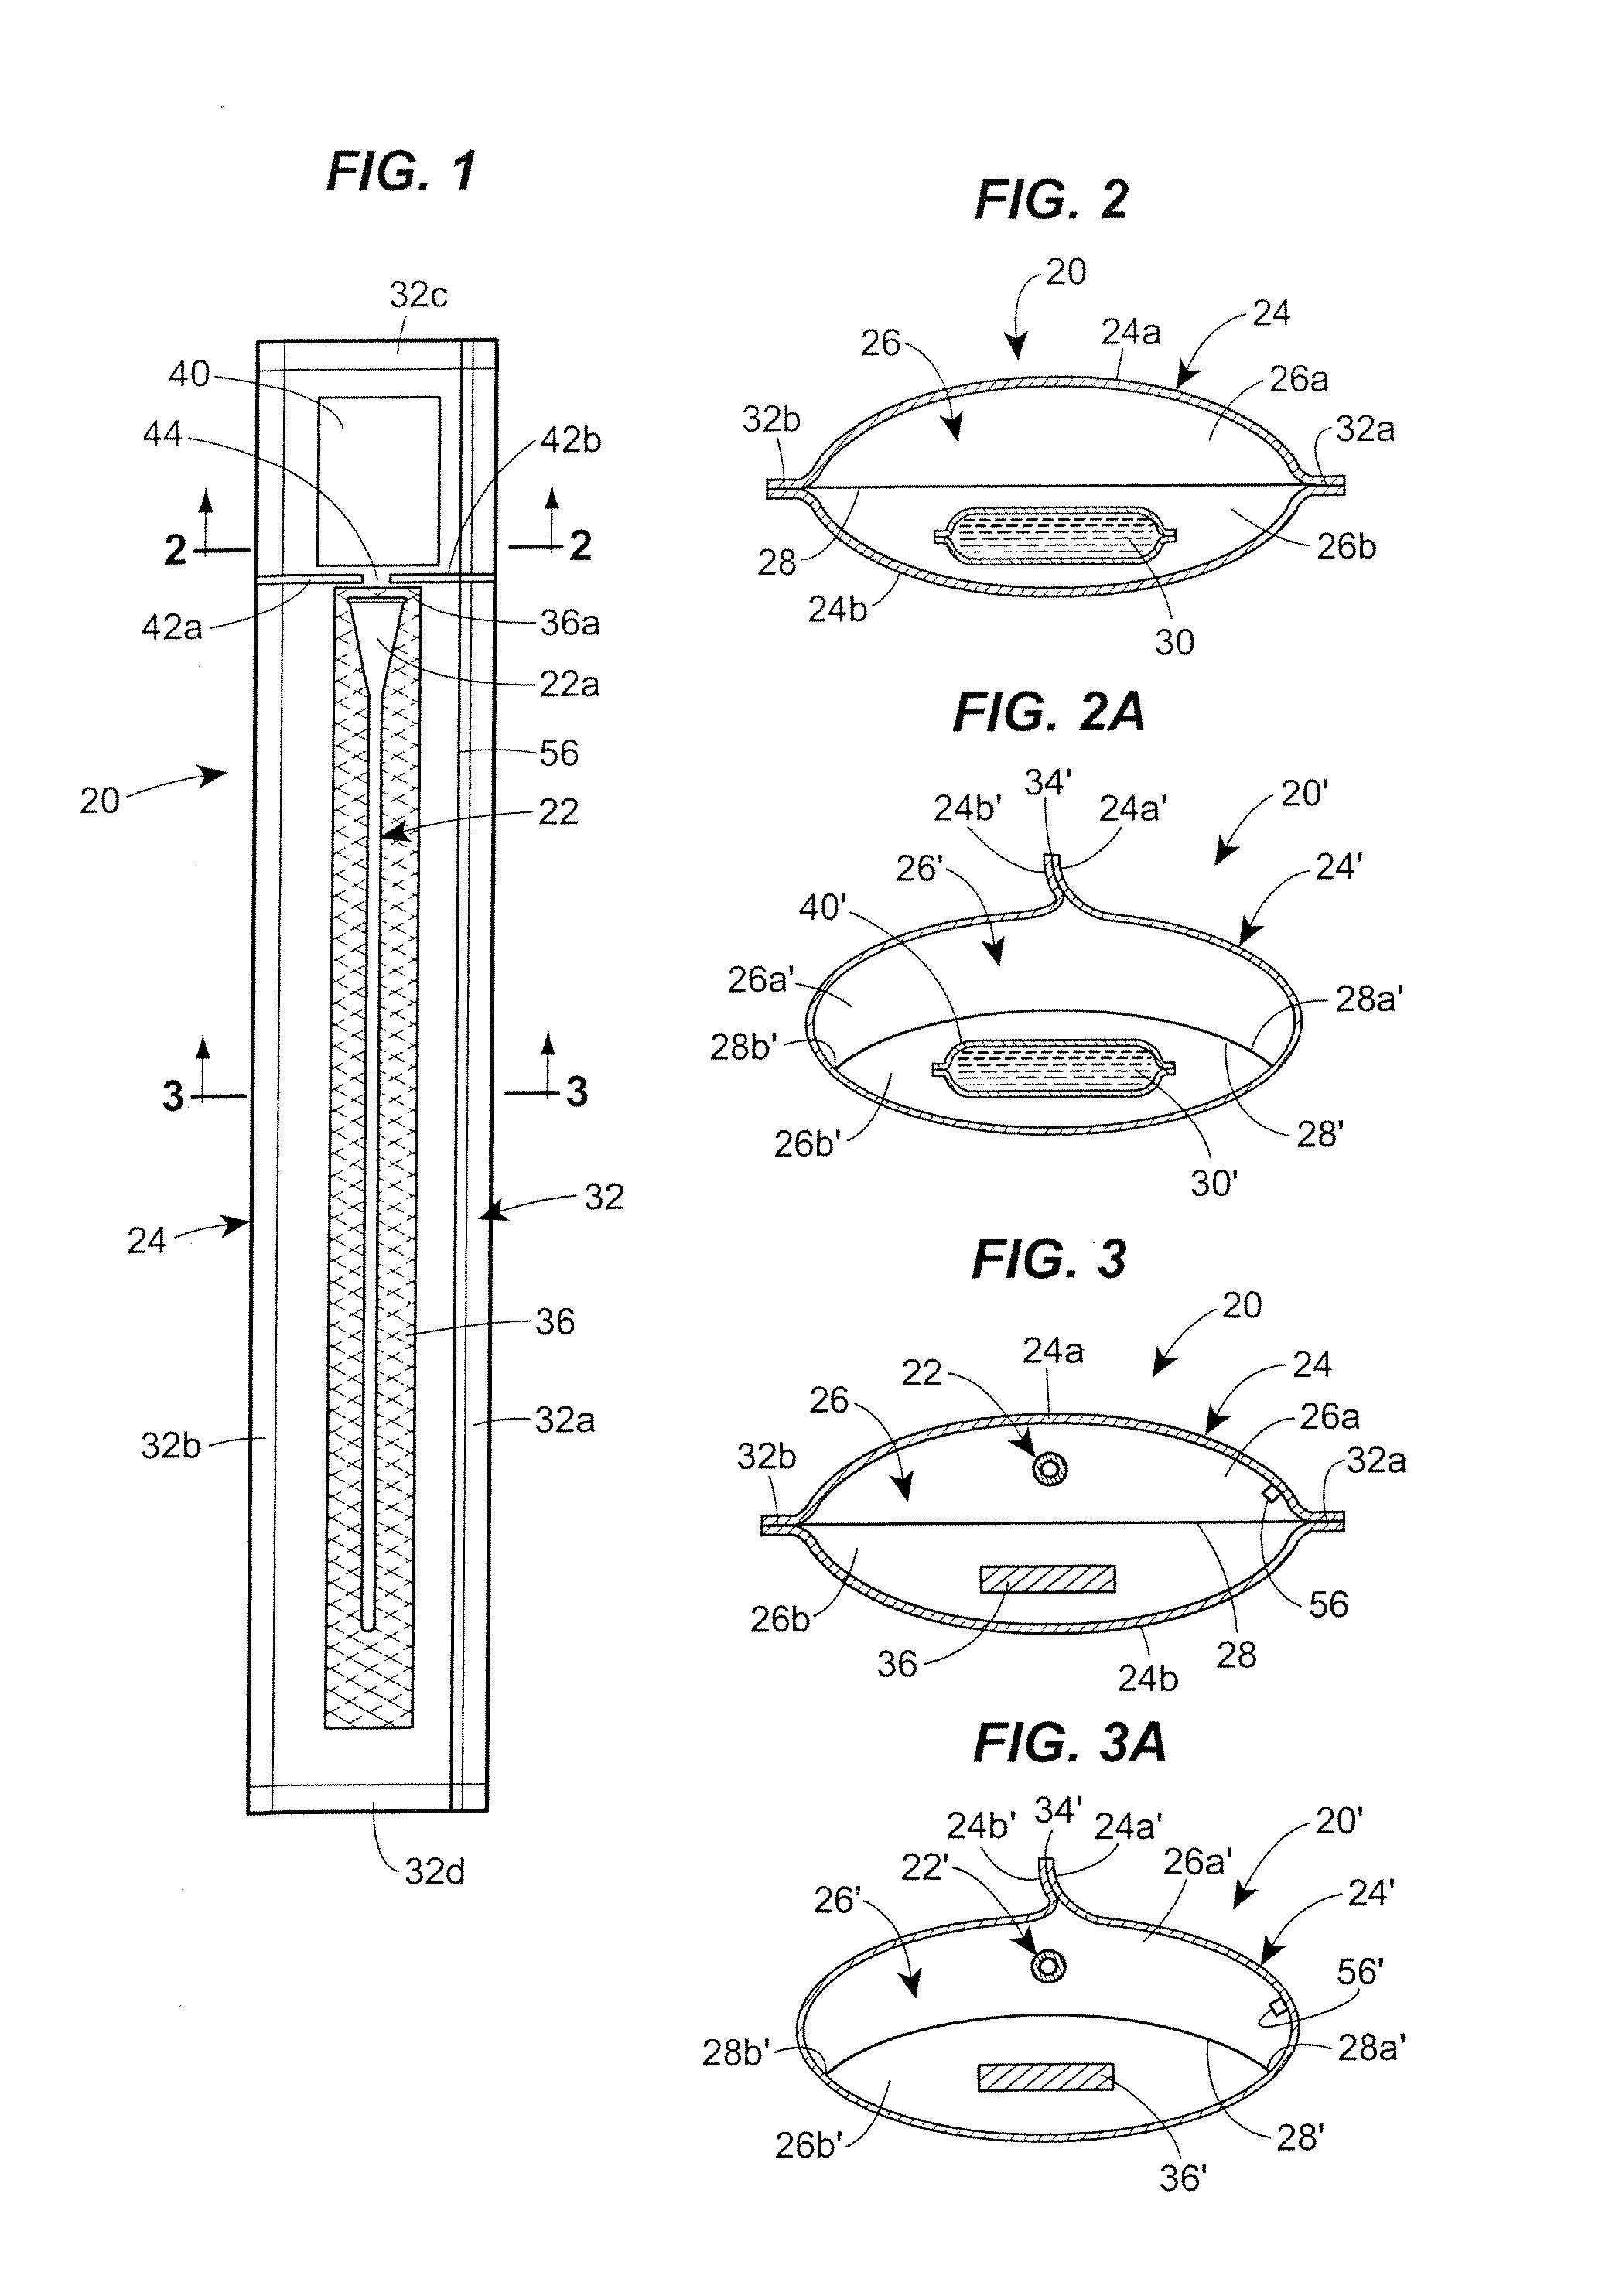 Vapor Hydrated Catheter Assembly and Method of Making Same